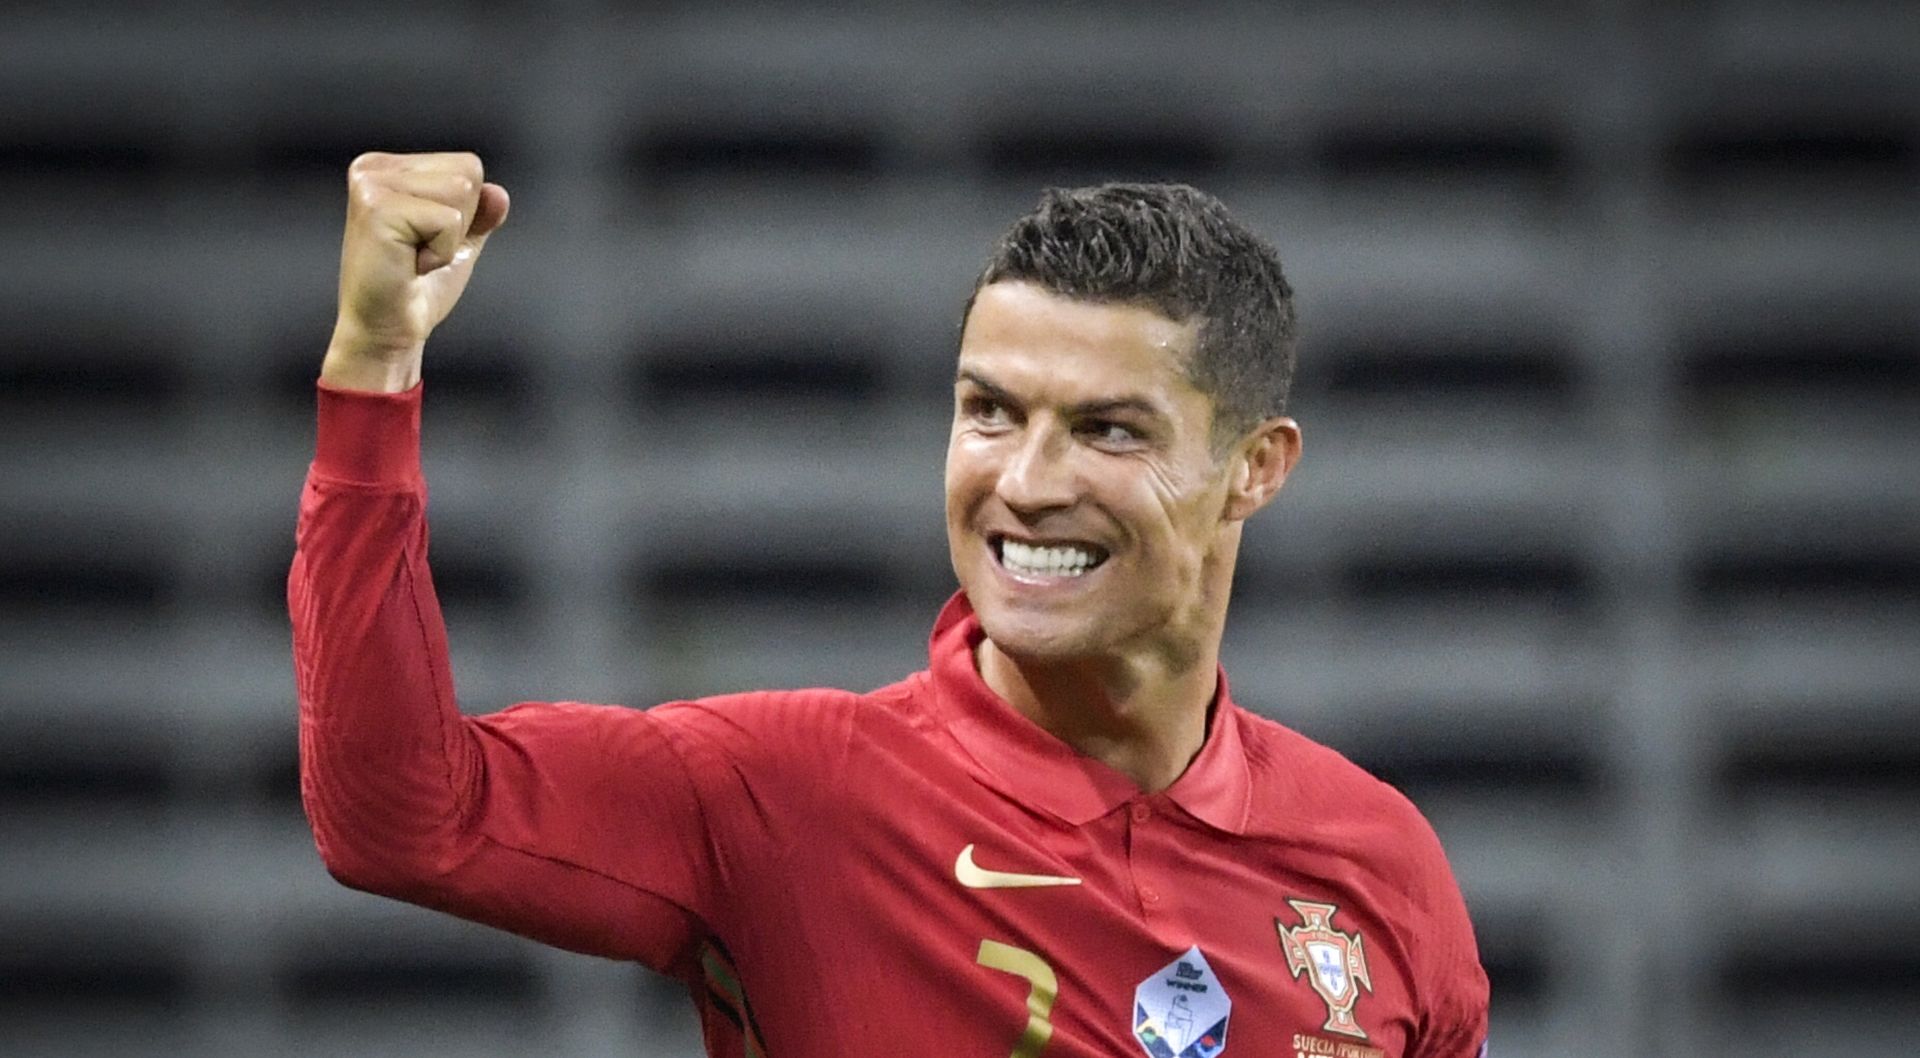 epa08786662 (FILE) - Portugals Cristiano Ronaldo celebrates after scoring during the UEFA Nations League, division A, group 3 soccer game betwween Sweden and Portugal at Friends Arena in Stockholm, Sweden, 08 September 2020 On 30 October 2020 Juventus FC announced that Cristiano Ronaldo has recovered from COVID-19. 'Cristiano Ronaldo carried out a check with a diagnostic test (swab) for Covid 19 -reads a statement from Juventus- The exam provided a negative result. The player has, therefore, recovered after 19 days and is no longer subjected to home isolation'.  EPA/Janerik Henriksson/TT SWEDEN OUT SWEDEN OUT *** Local Caption *** 56328032